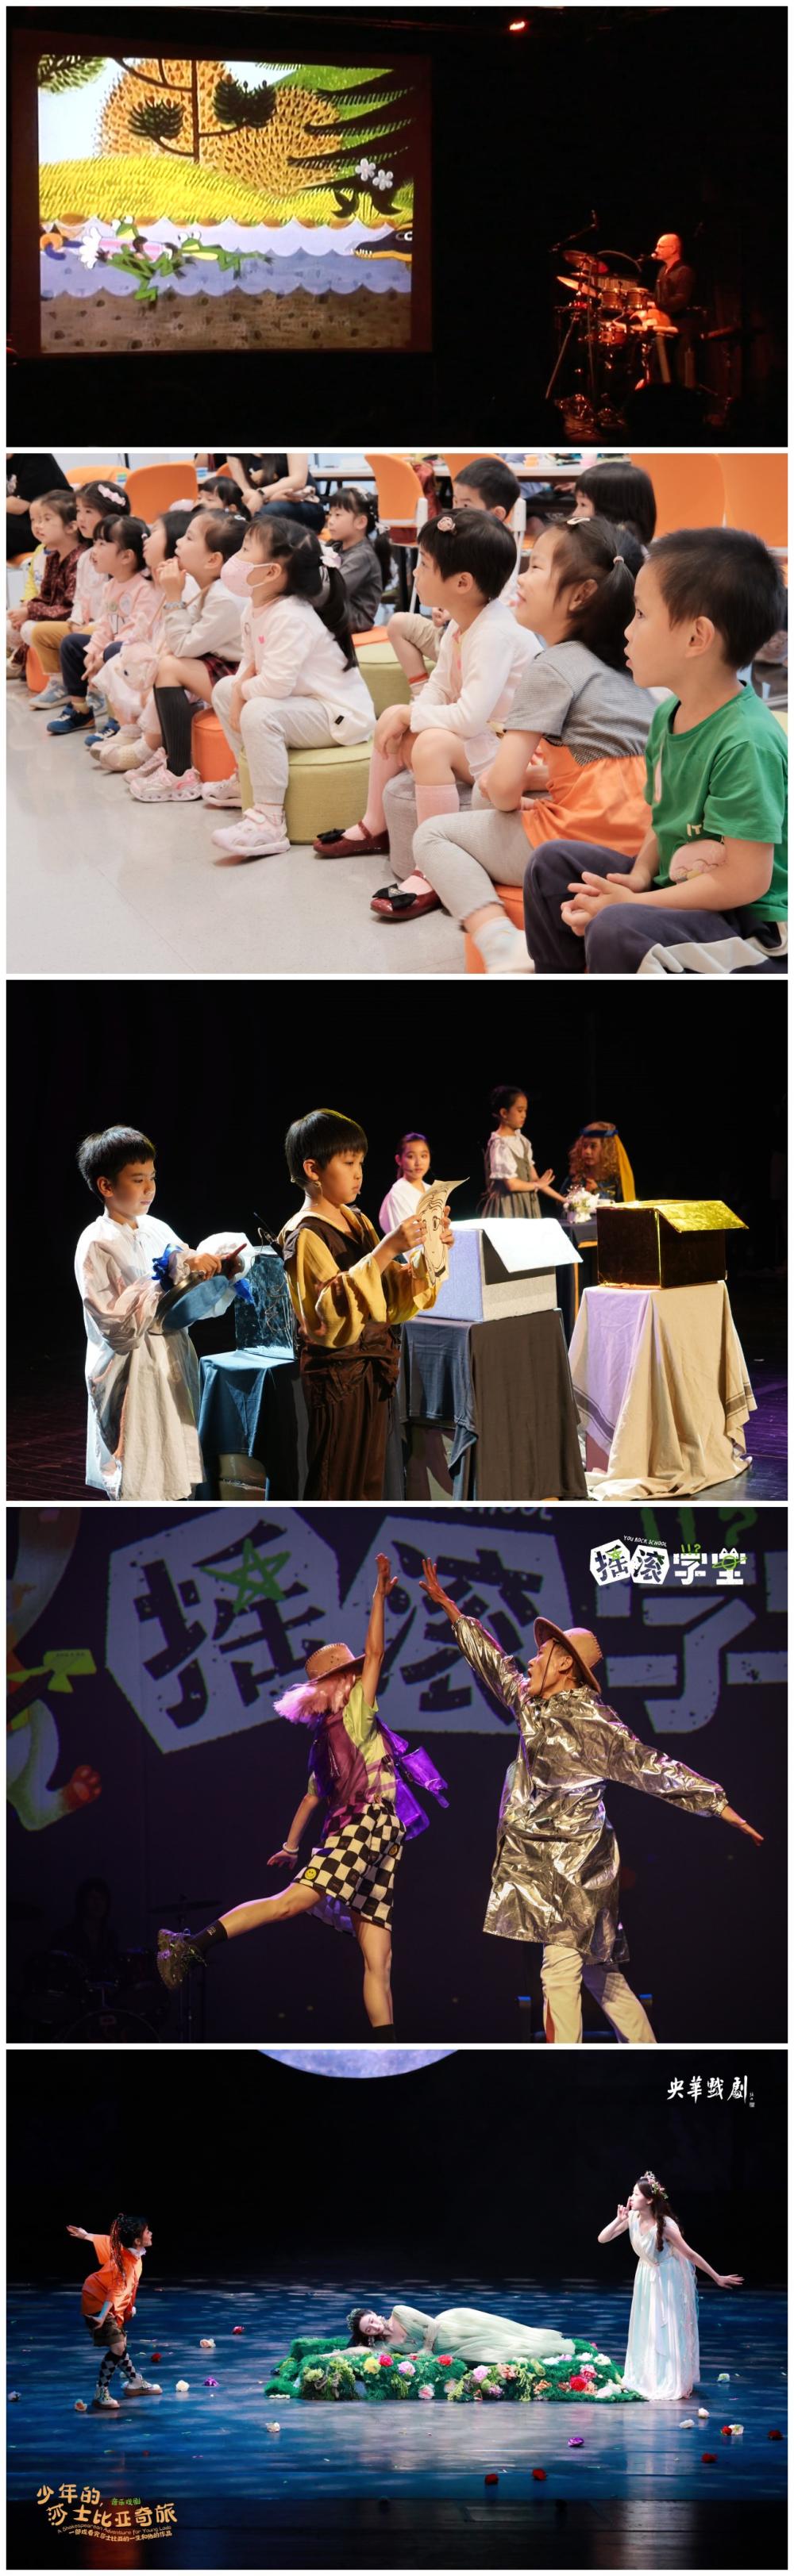 Compendium of Materia Medica kicked off the YOUNG Theater's "Summer Parent Child Art Season", with Noichi and Nina performing in the drama | performance | YOUNG